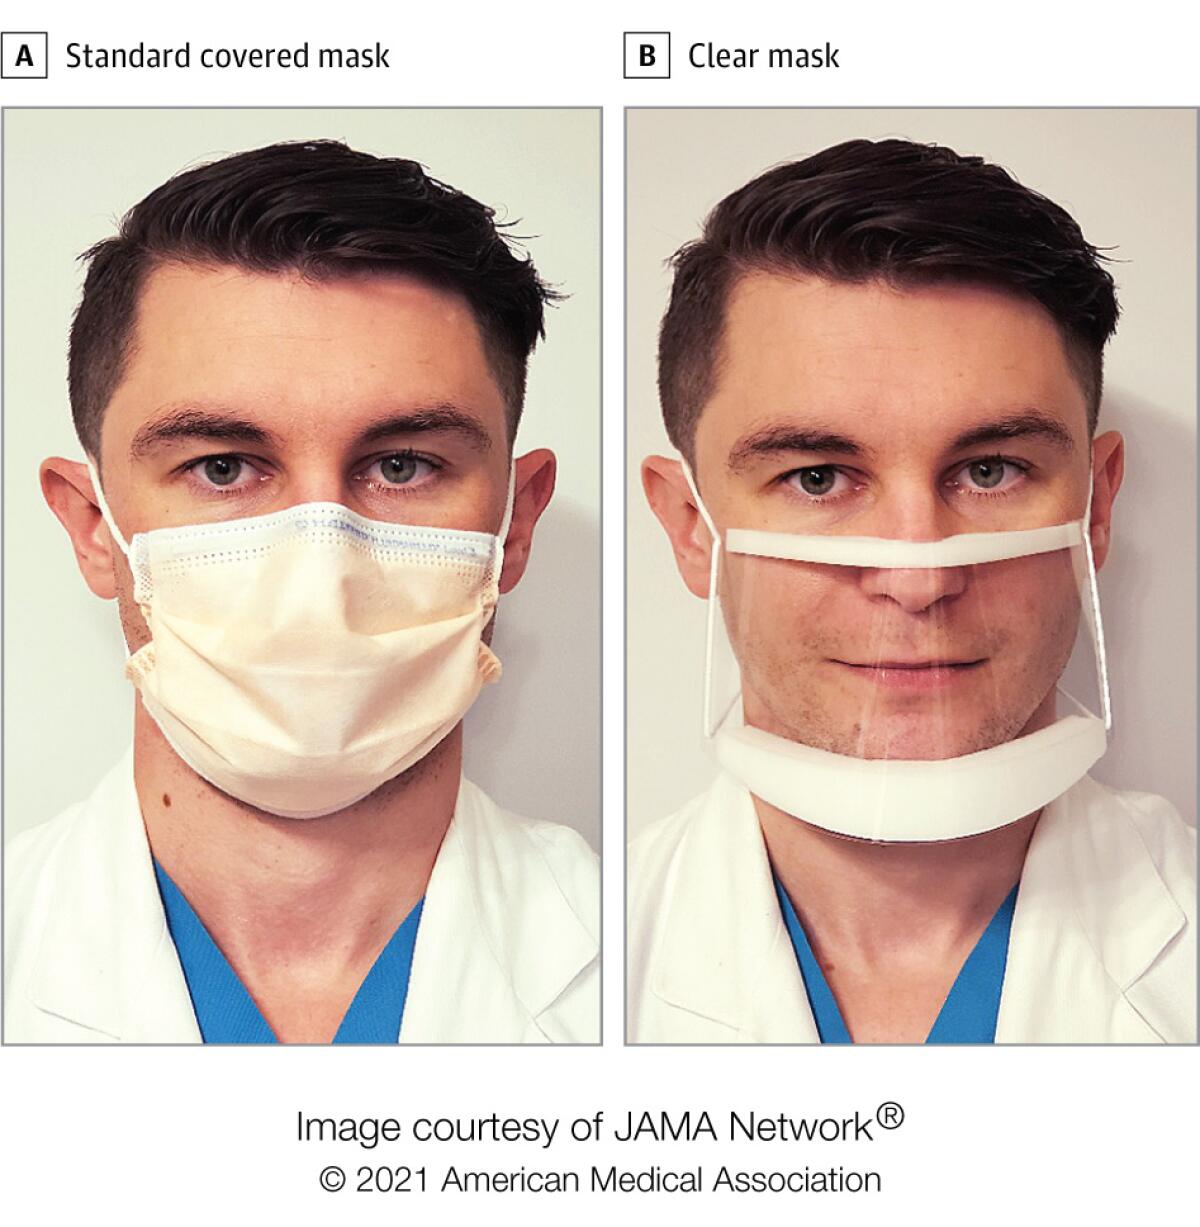 A doctor wears traditional, left, and clear face masks